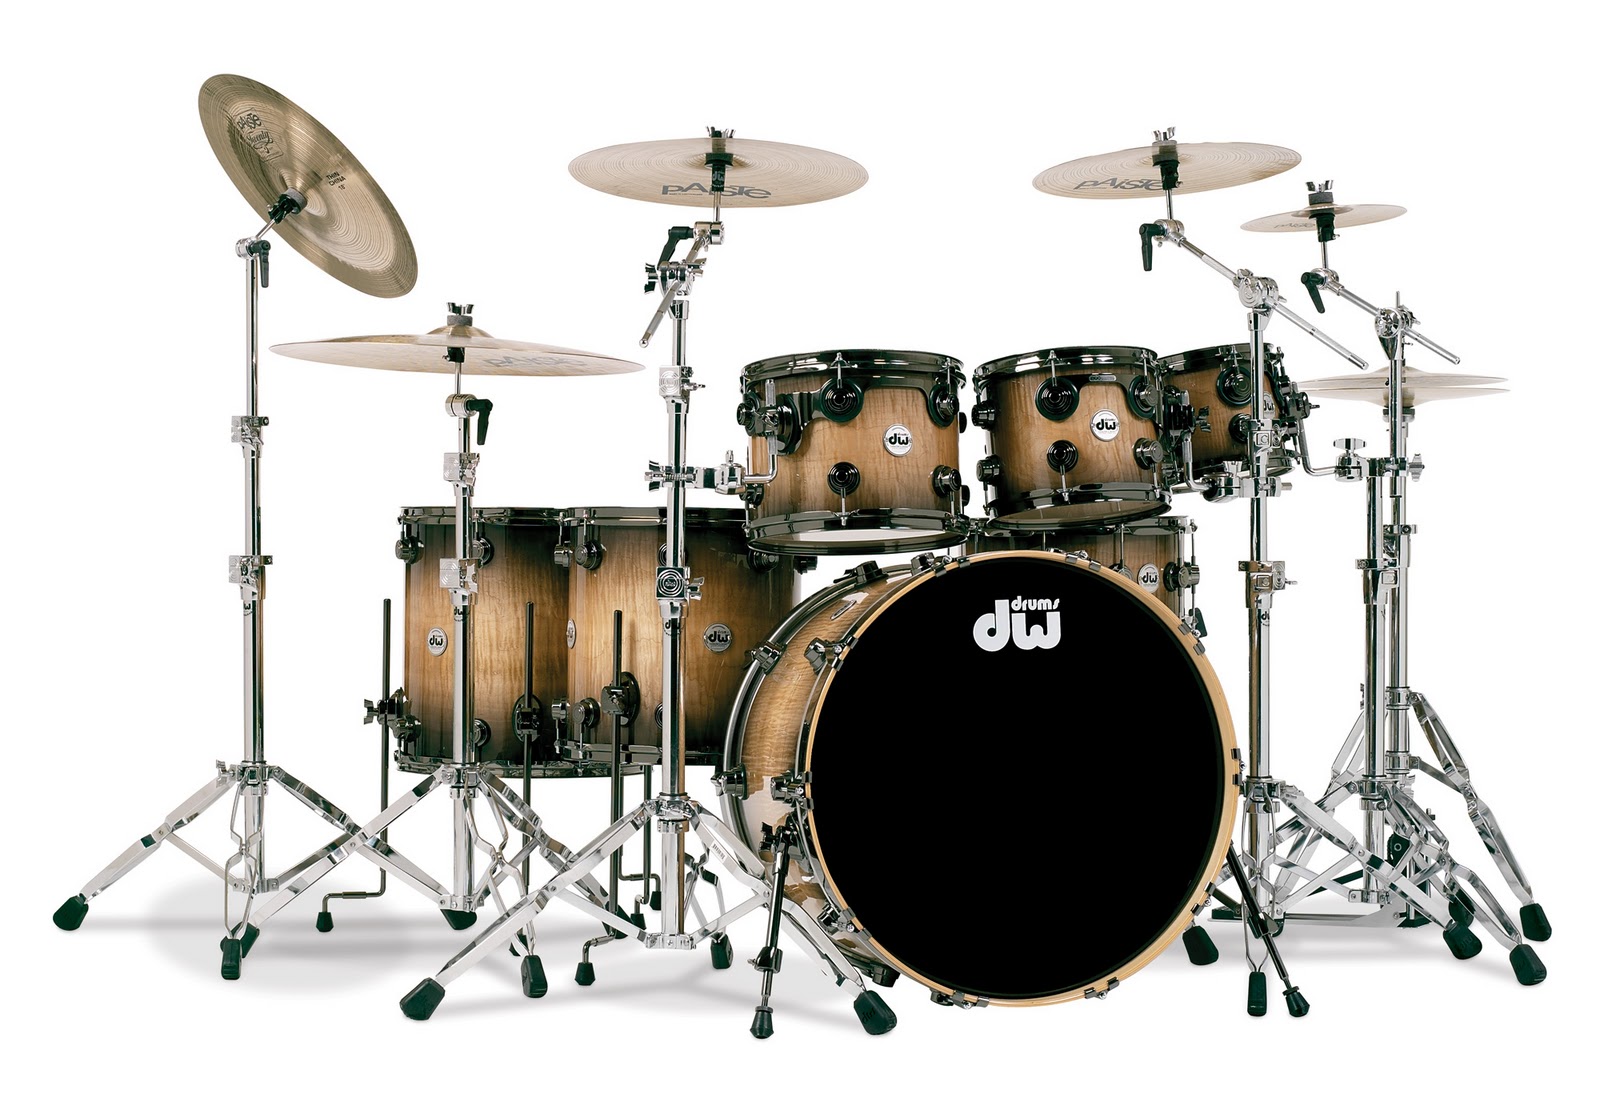 The Dave Factor New Year's Resolution 3 Get a new drum kit!